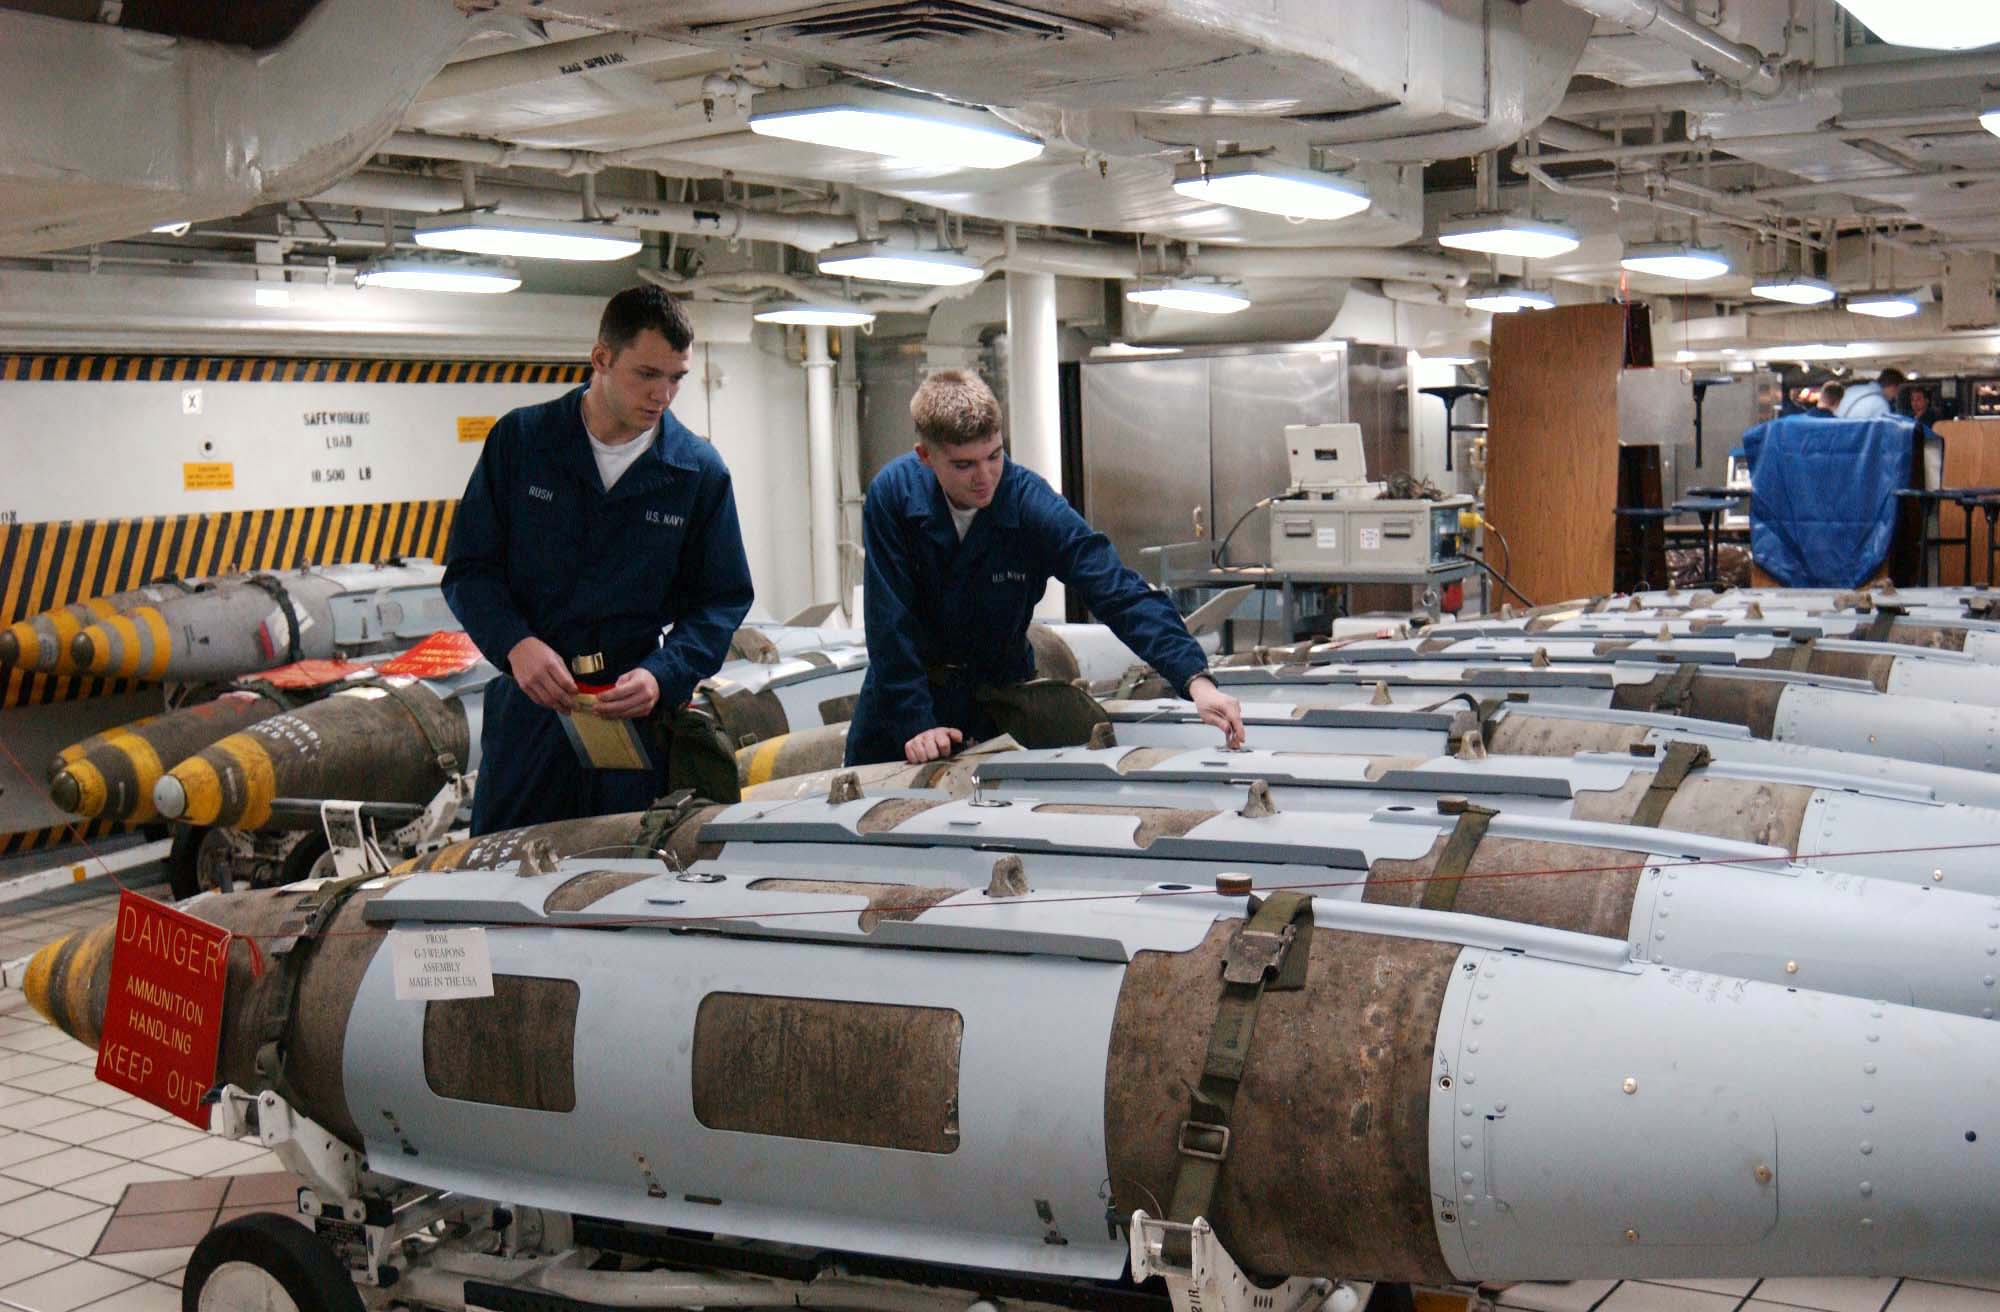 US_Navy_030320-N-5292M-007_Aviation_Ordnancemen_inspect_a_Joint_Direct_Attack_Munition_%28JDAM%29_GBU-31_in_preparation_for_loading_on_air_wing_aircraft.jpg